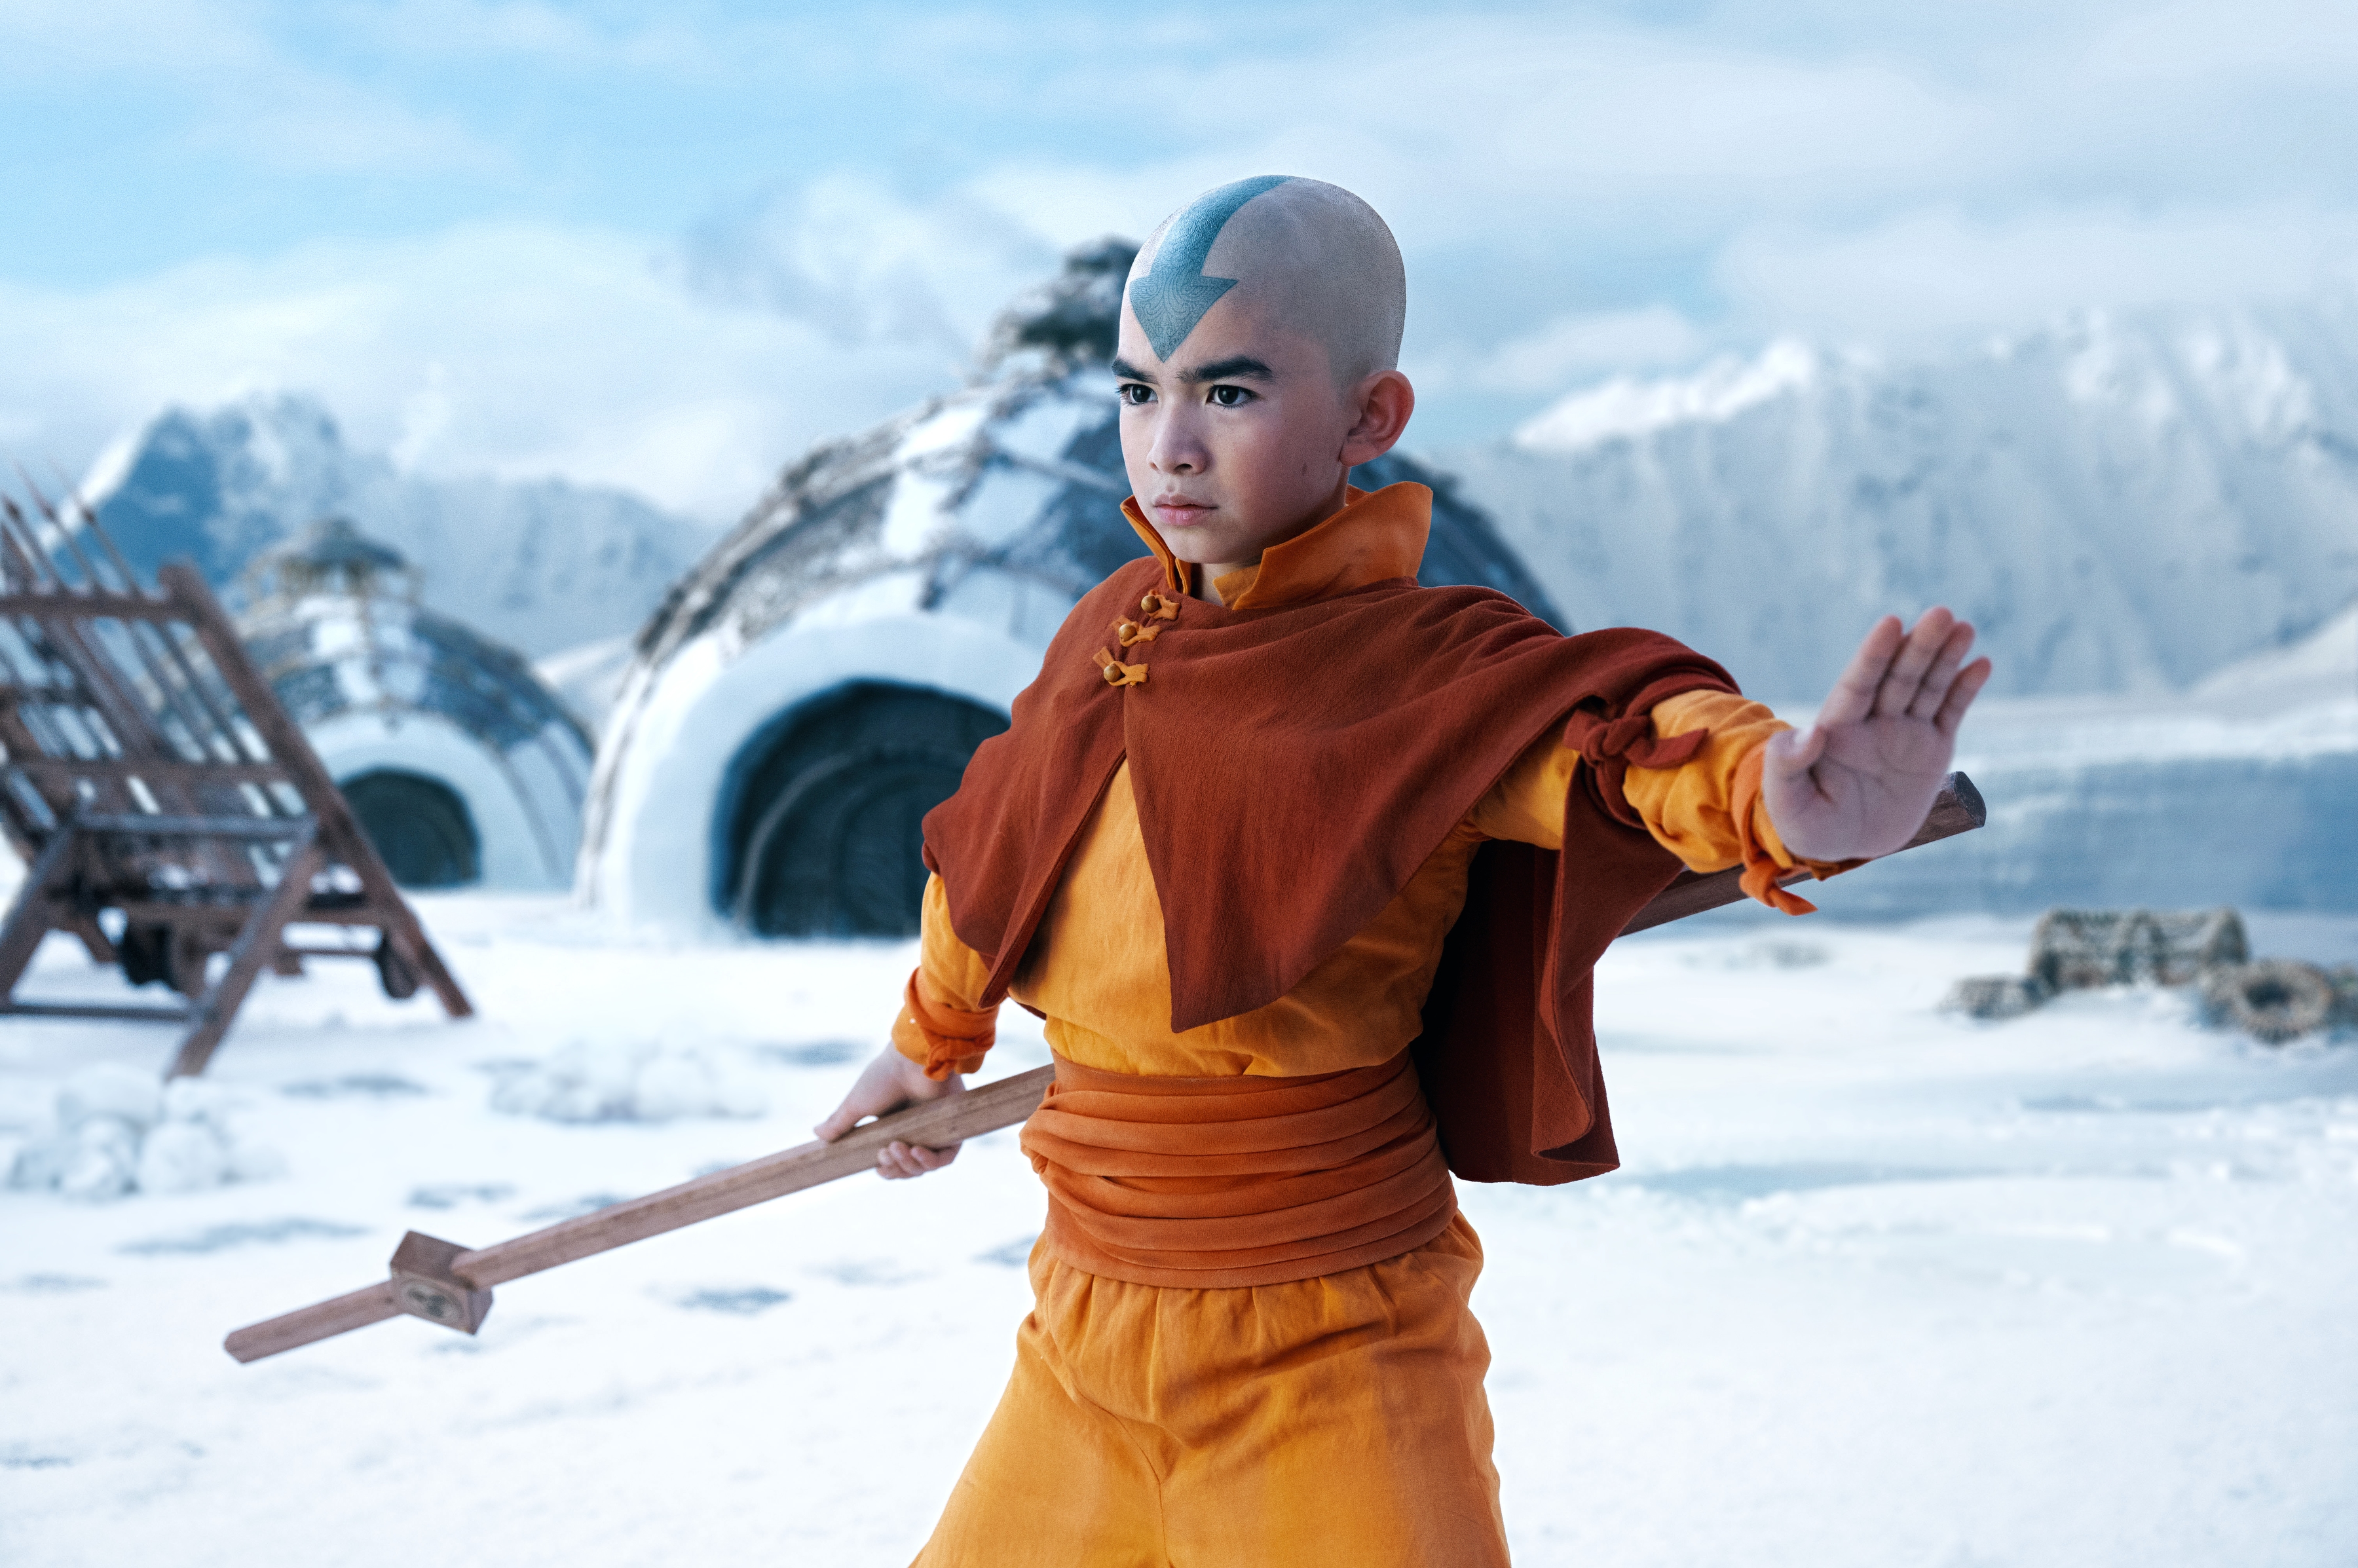 Desktop wallpaper of Avatar: The Last Airbender TV show - high definition image with beautiful background featuring characters from the show.